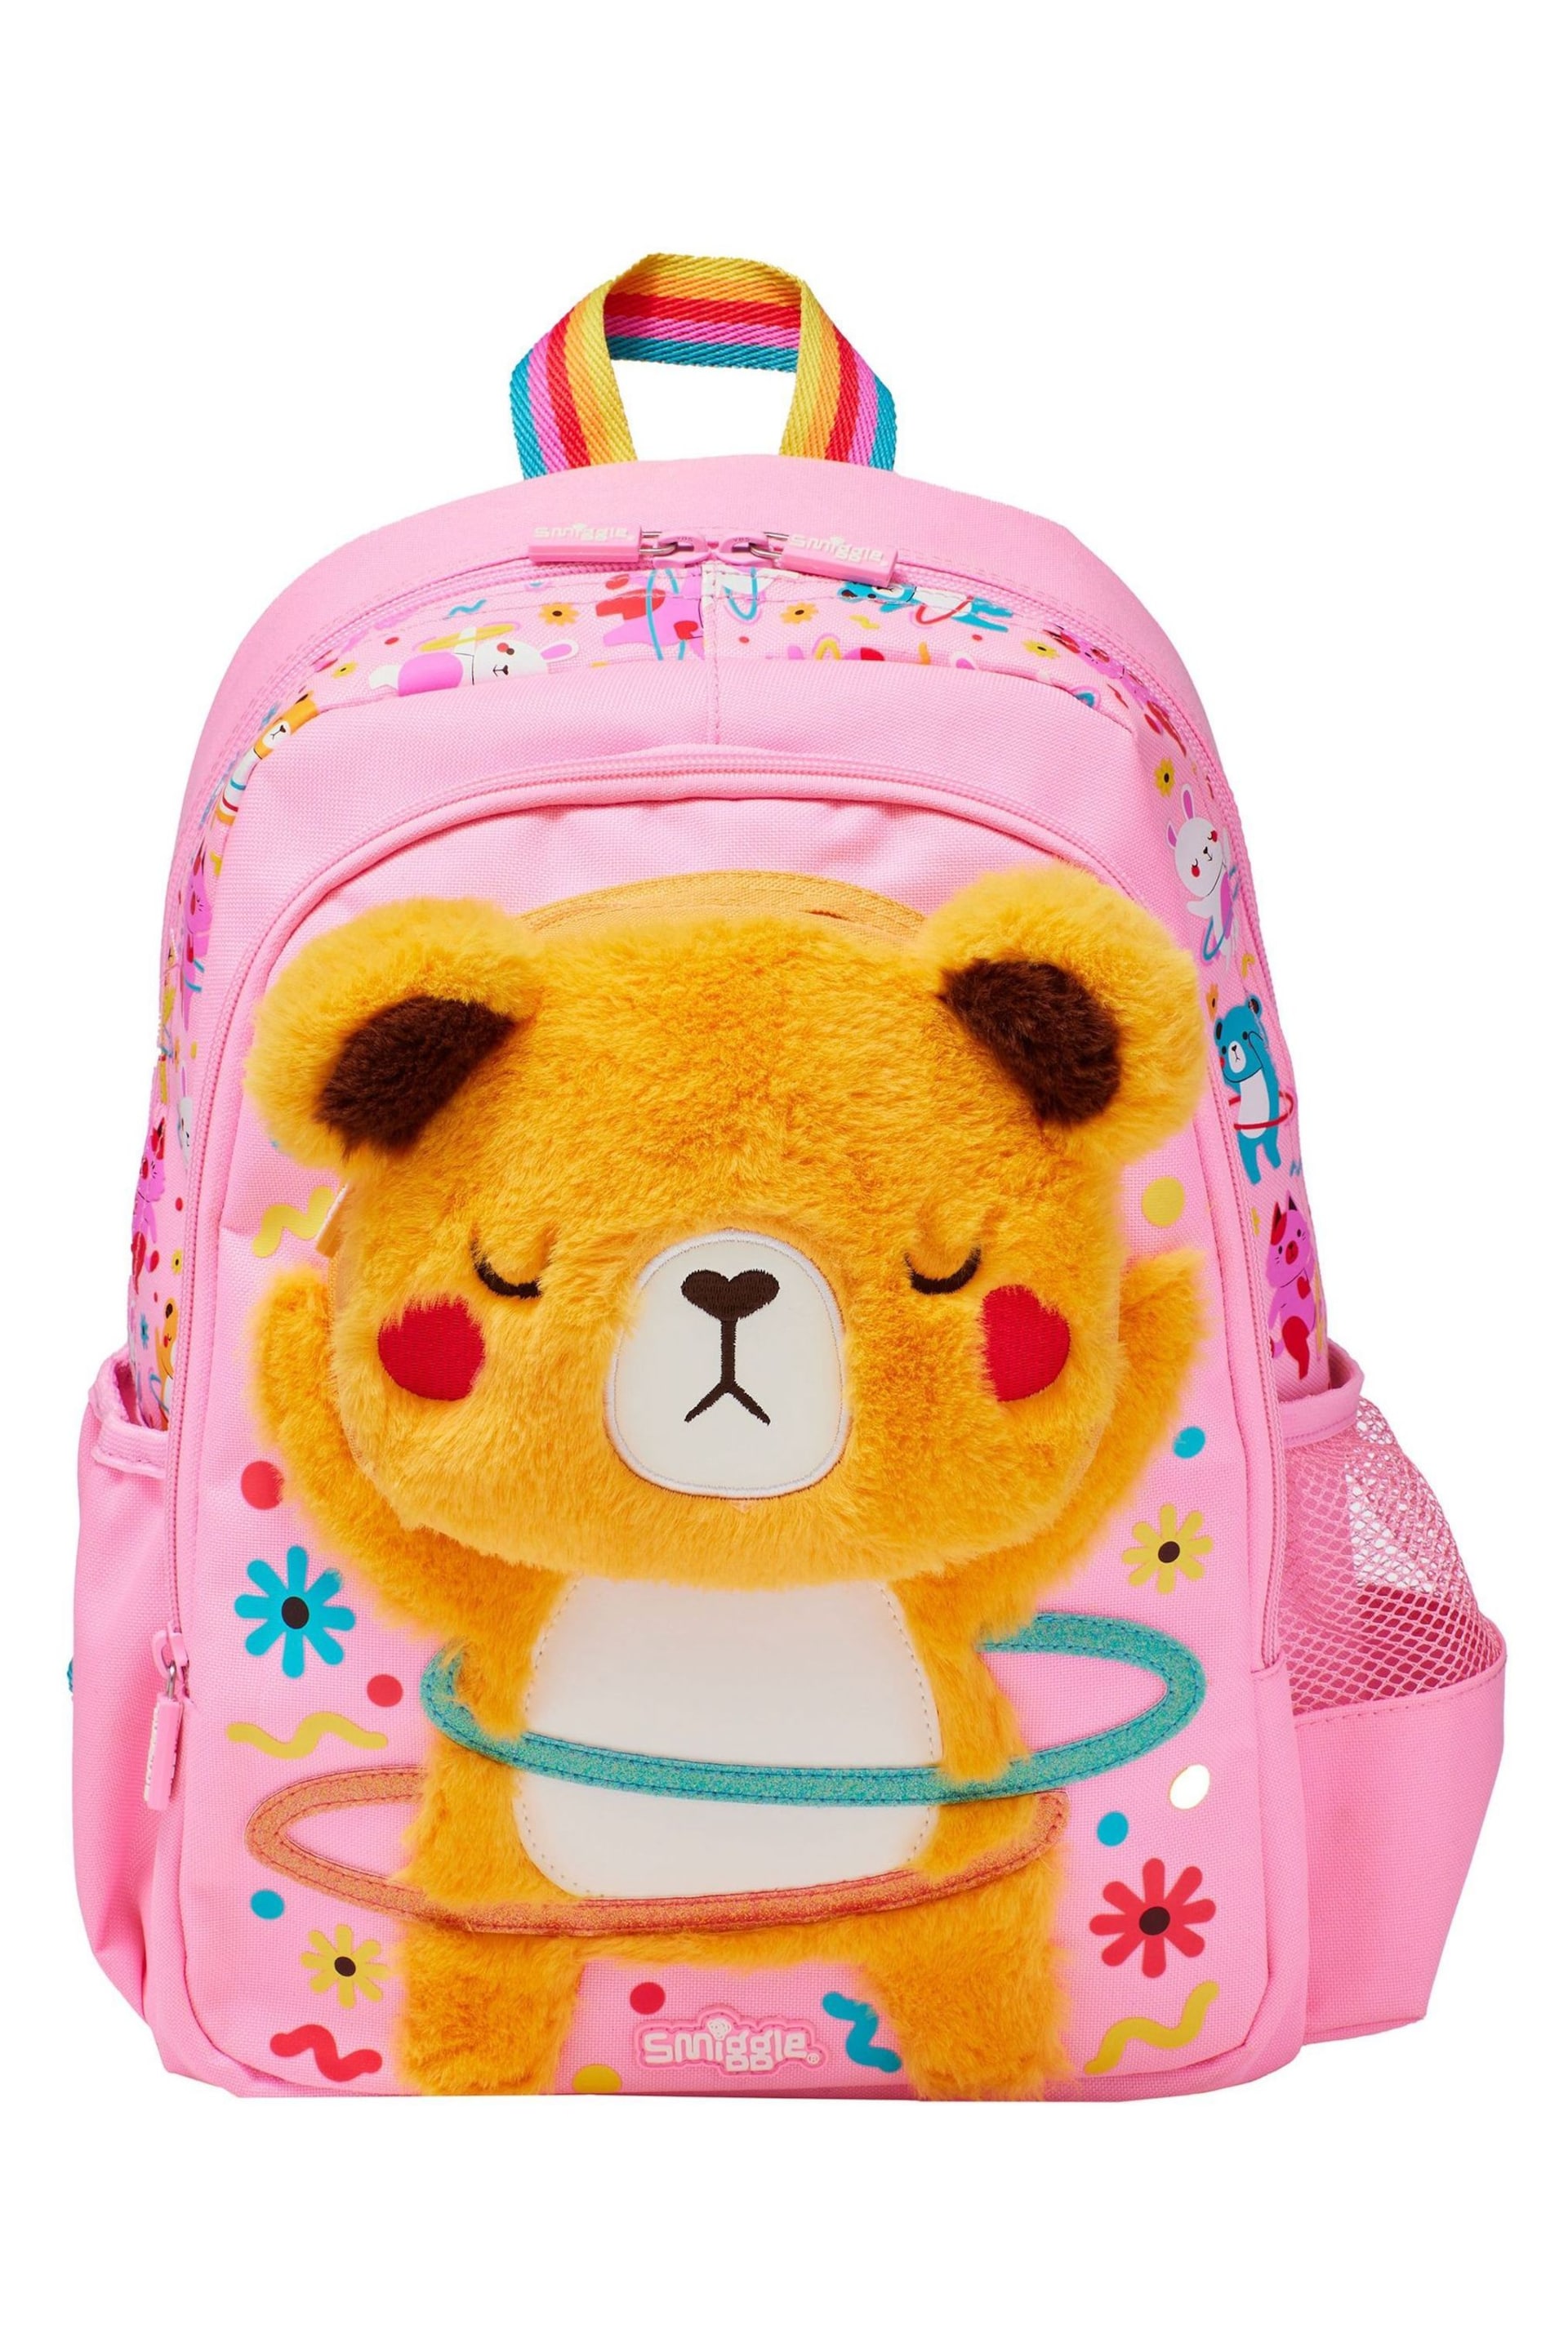 Smiggle Pink Junior Lets Play Character Backpack - Image 1 of 3